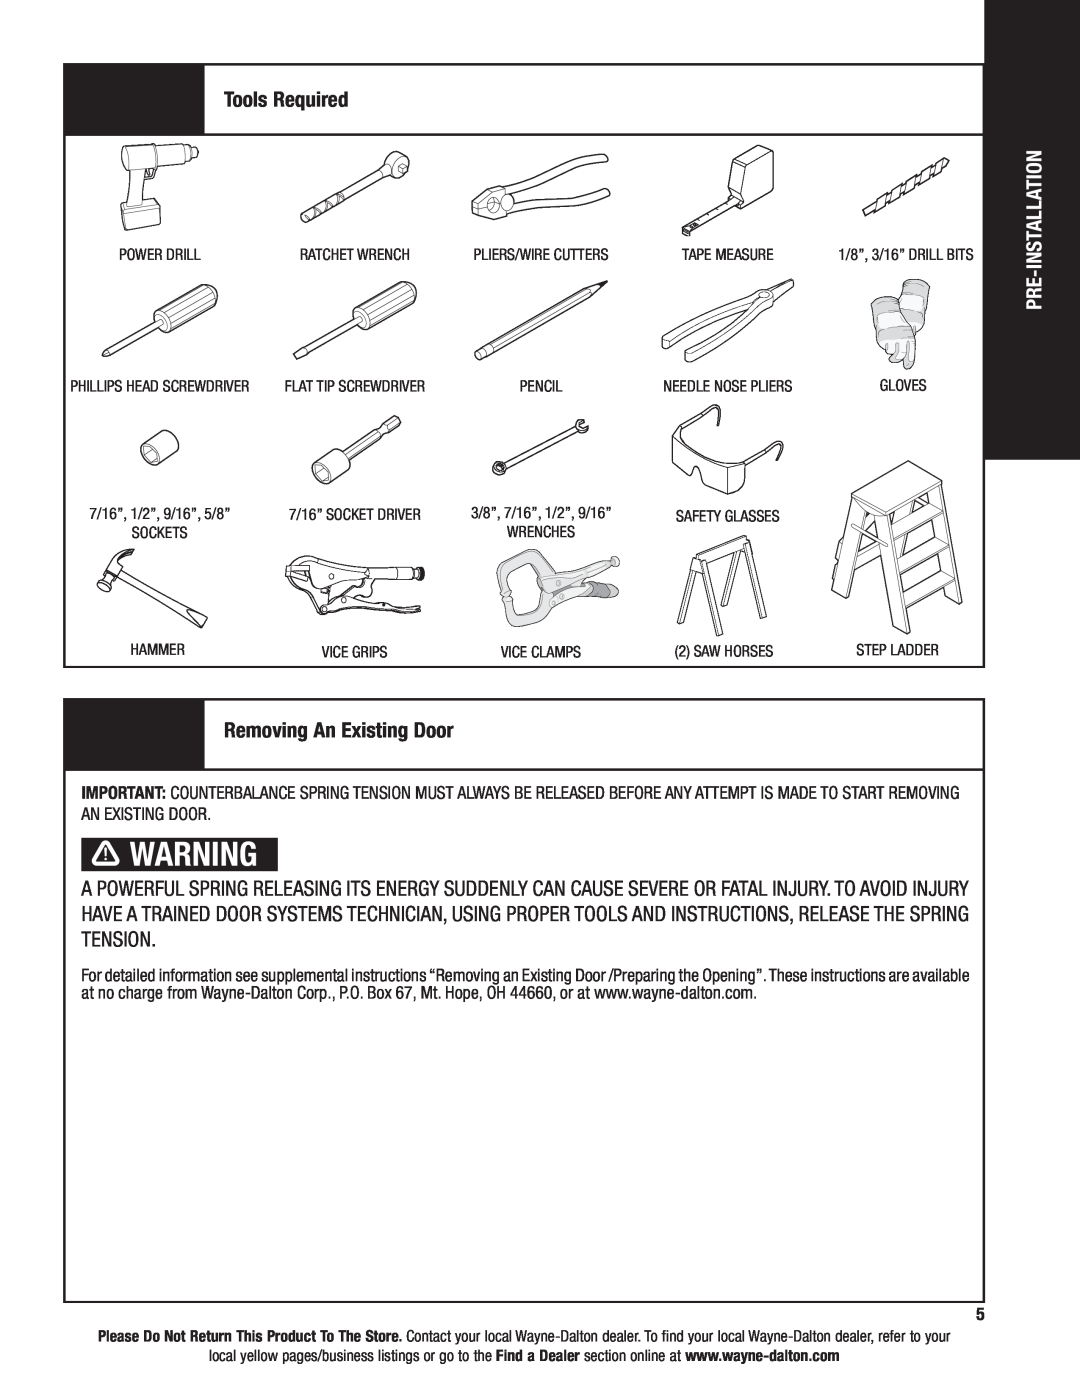 Wayne-Dalton 6100 installation instructions Tools Required, Removing An Existing Door, Pre-Installation 